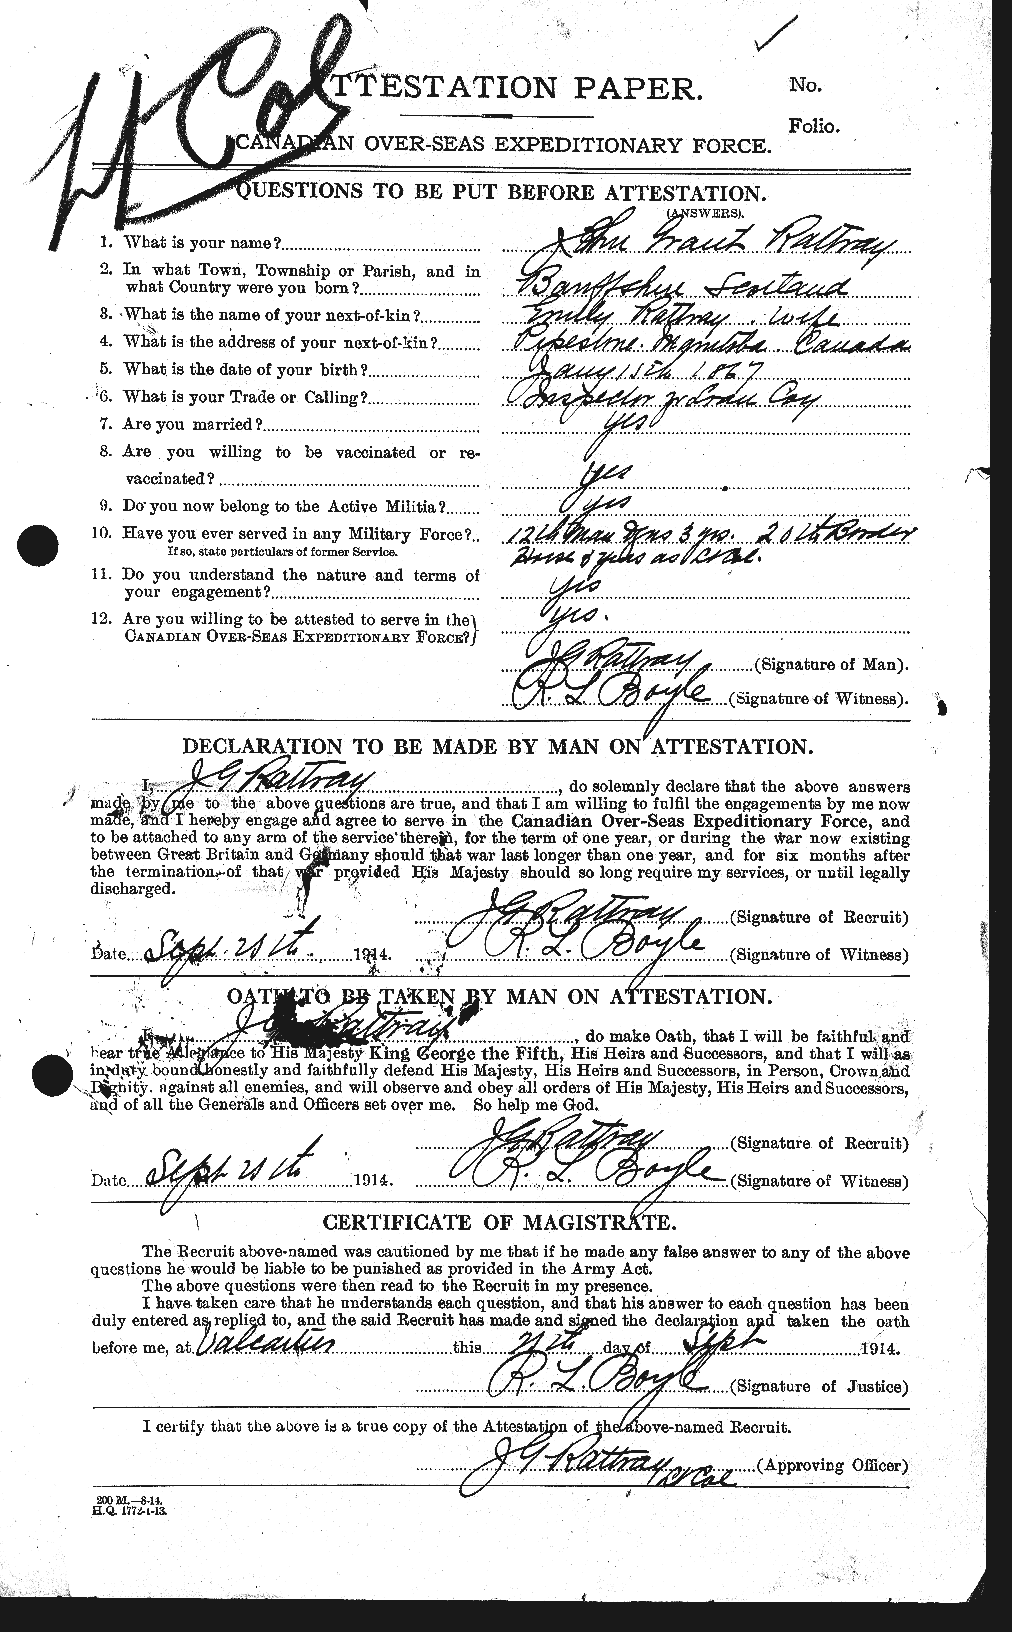 Personnel Records of the First World War - CEF 595701a